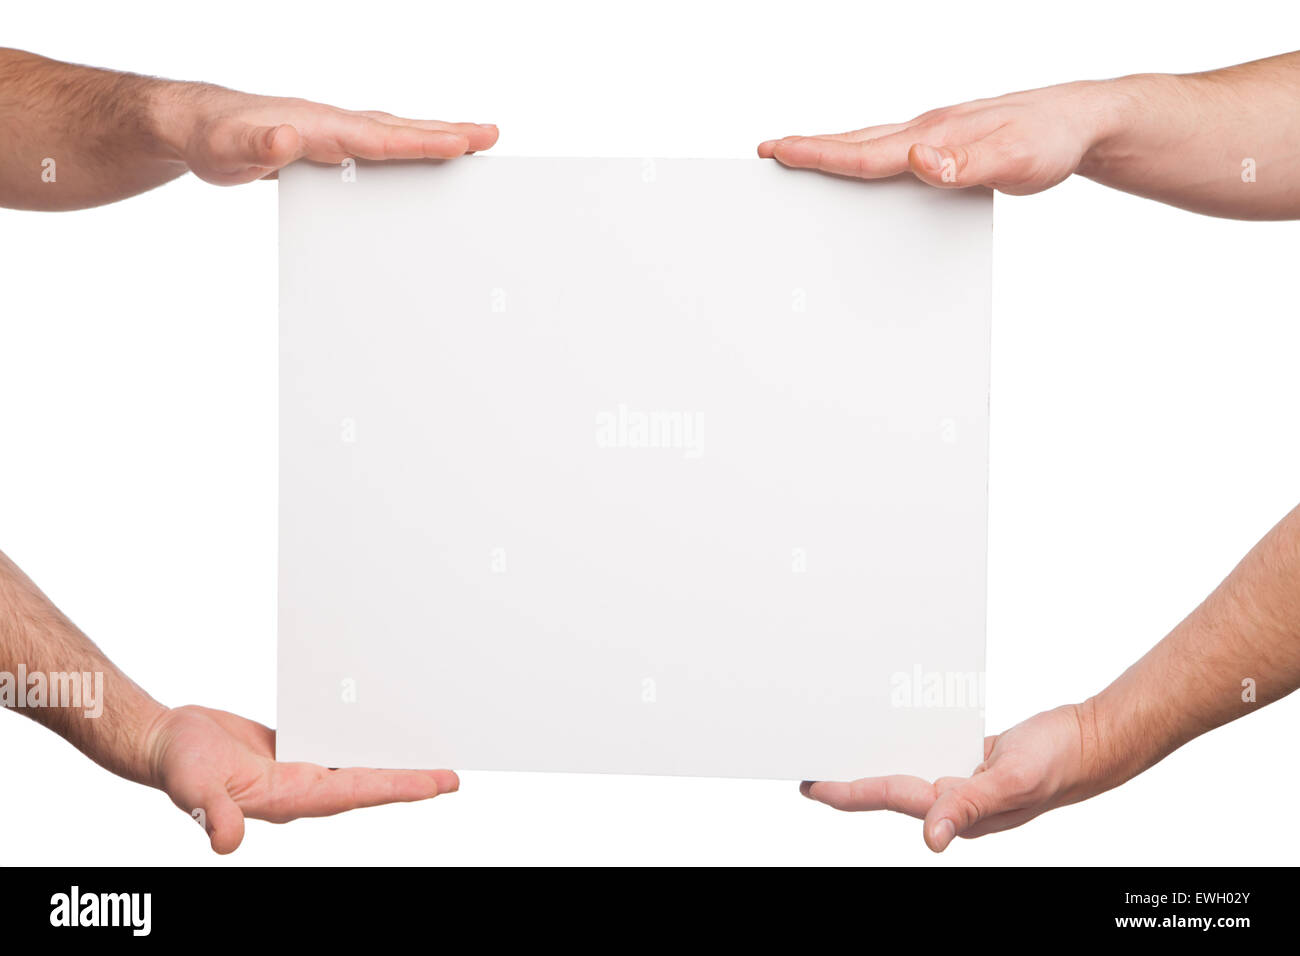 Four Hands holding a blank white board. isolated on white Banque D'Images